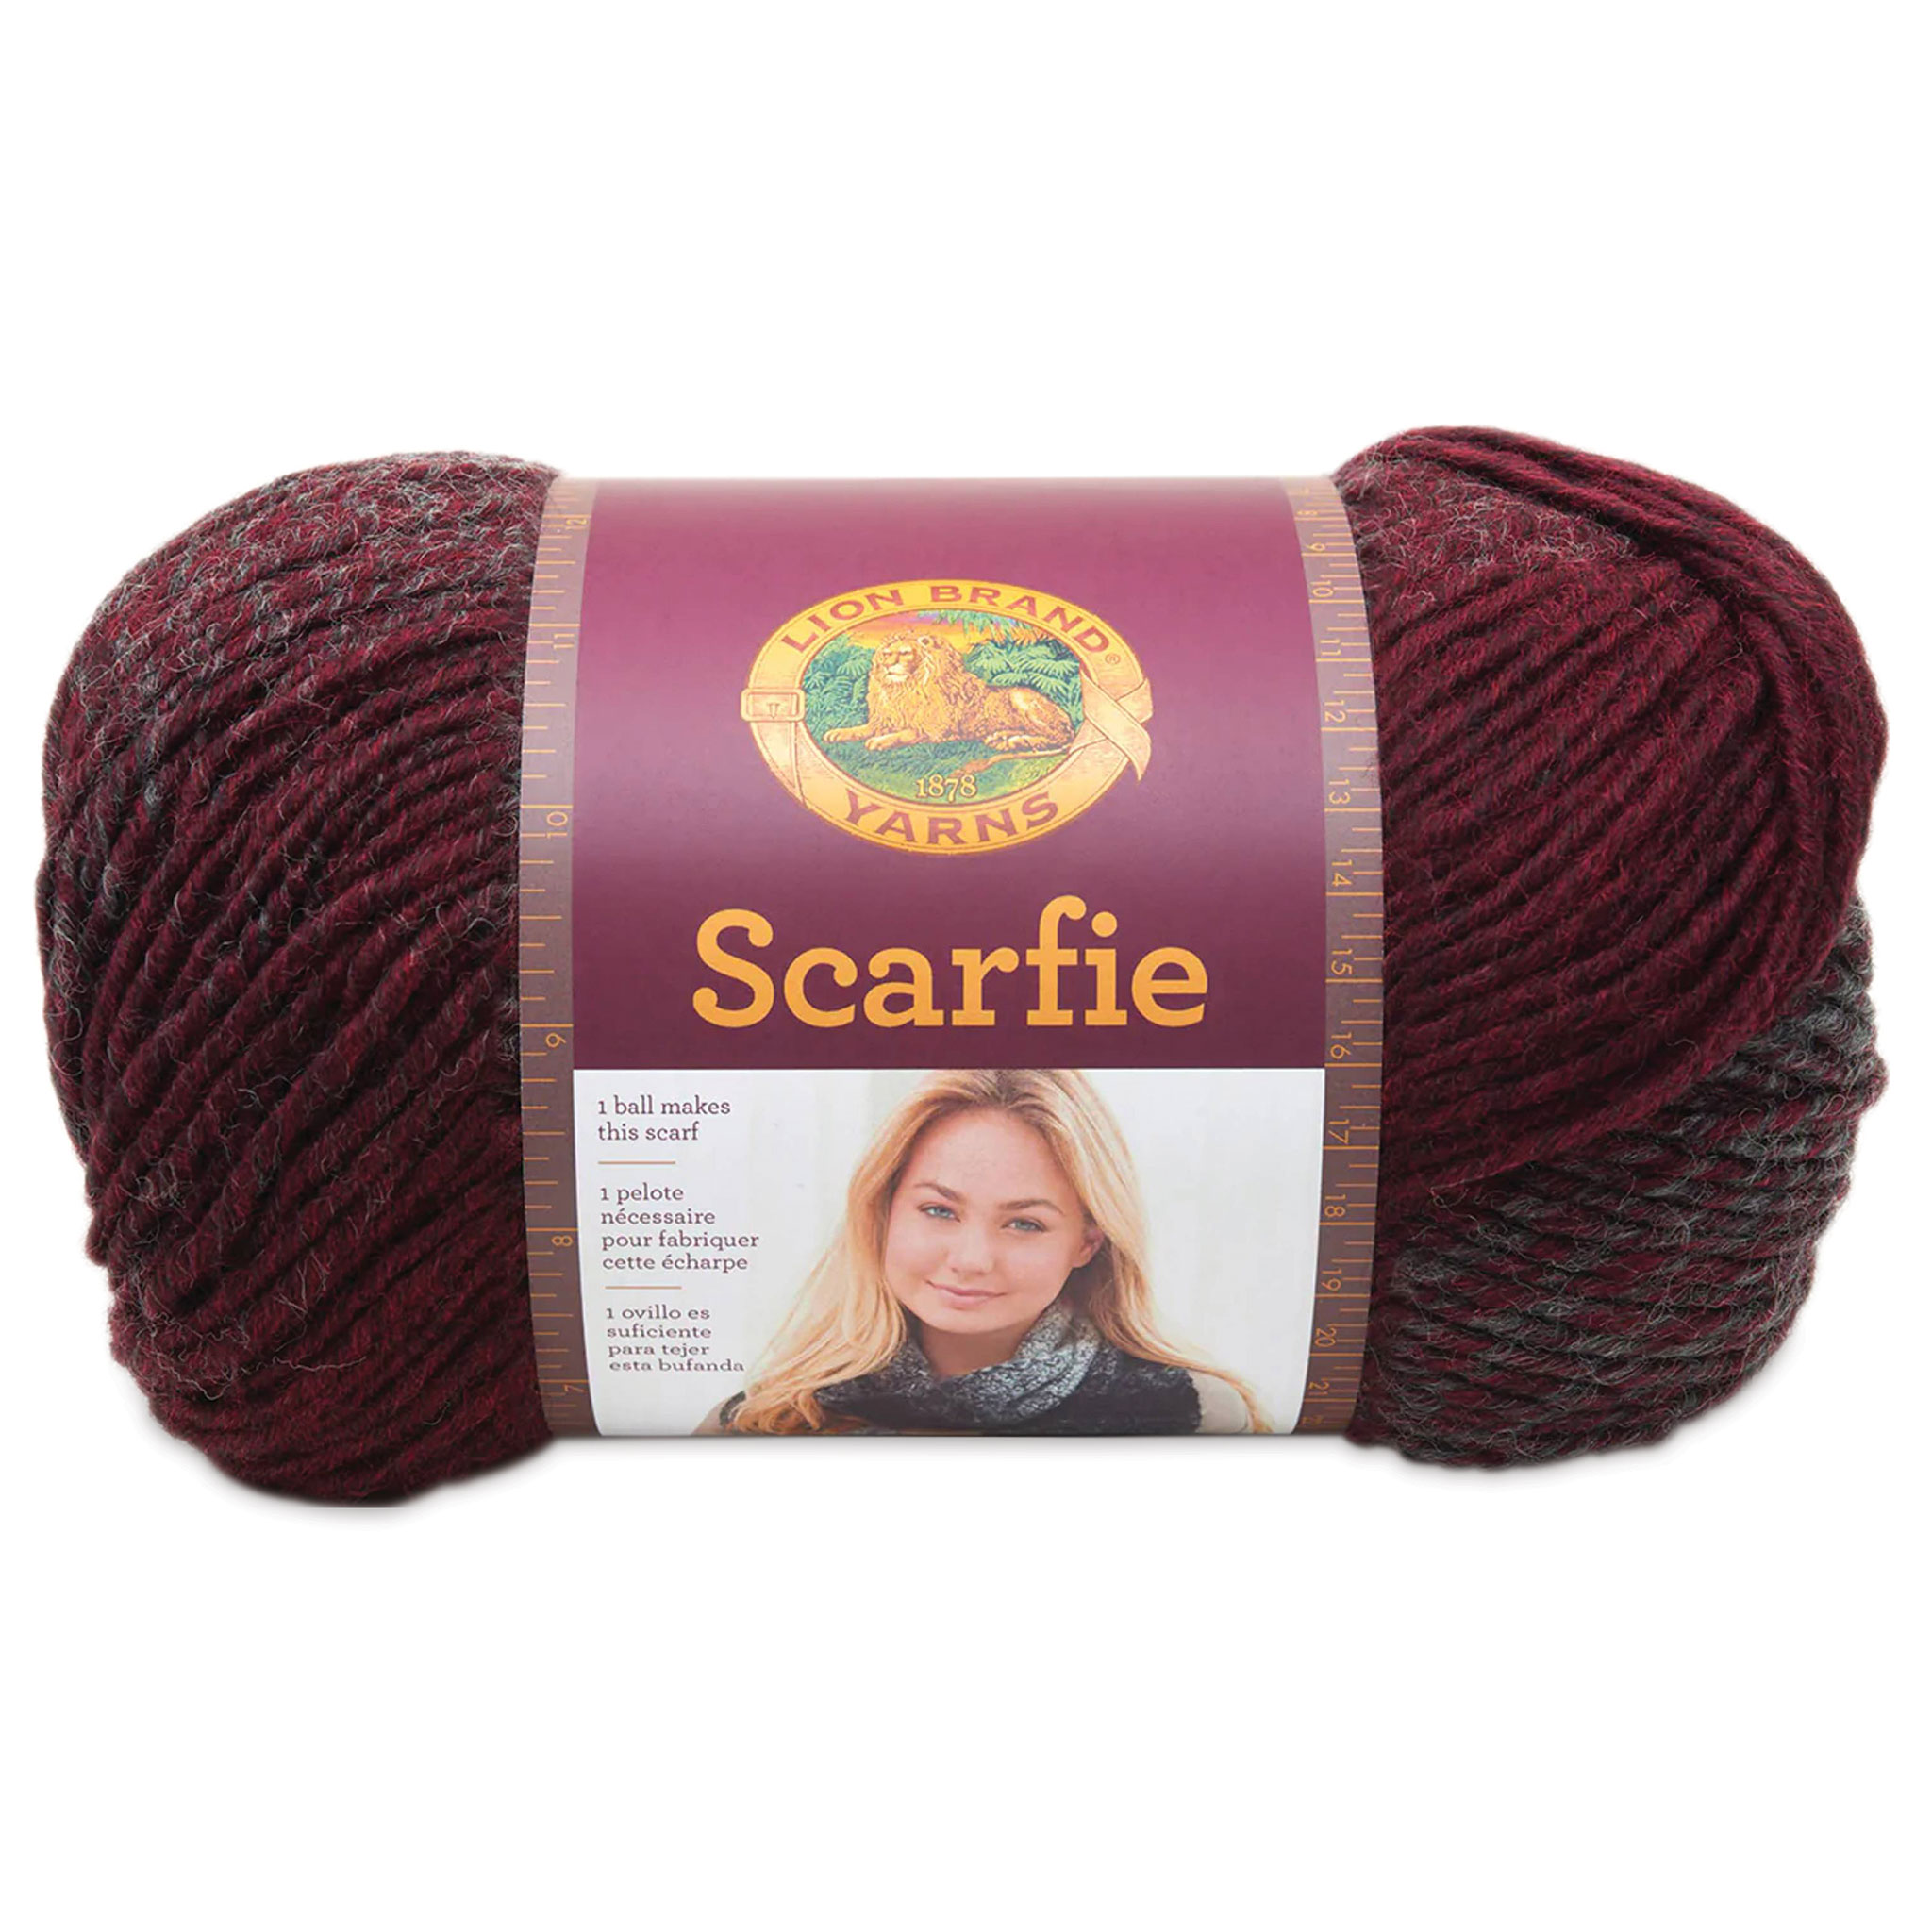 8 Designs to Make in Scarfie Yarn